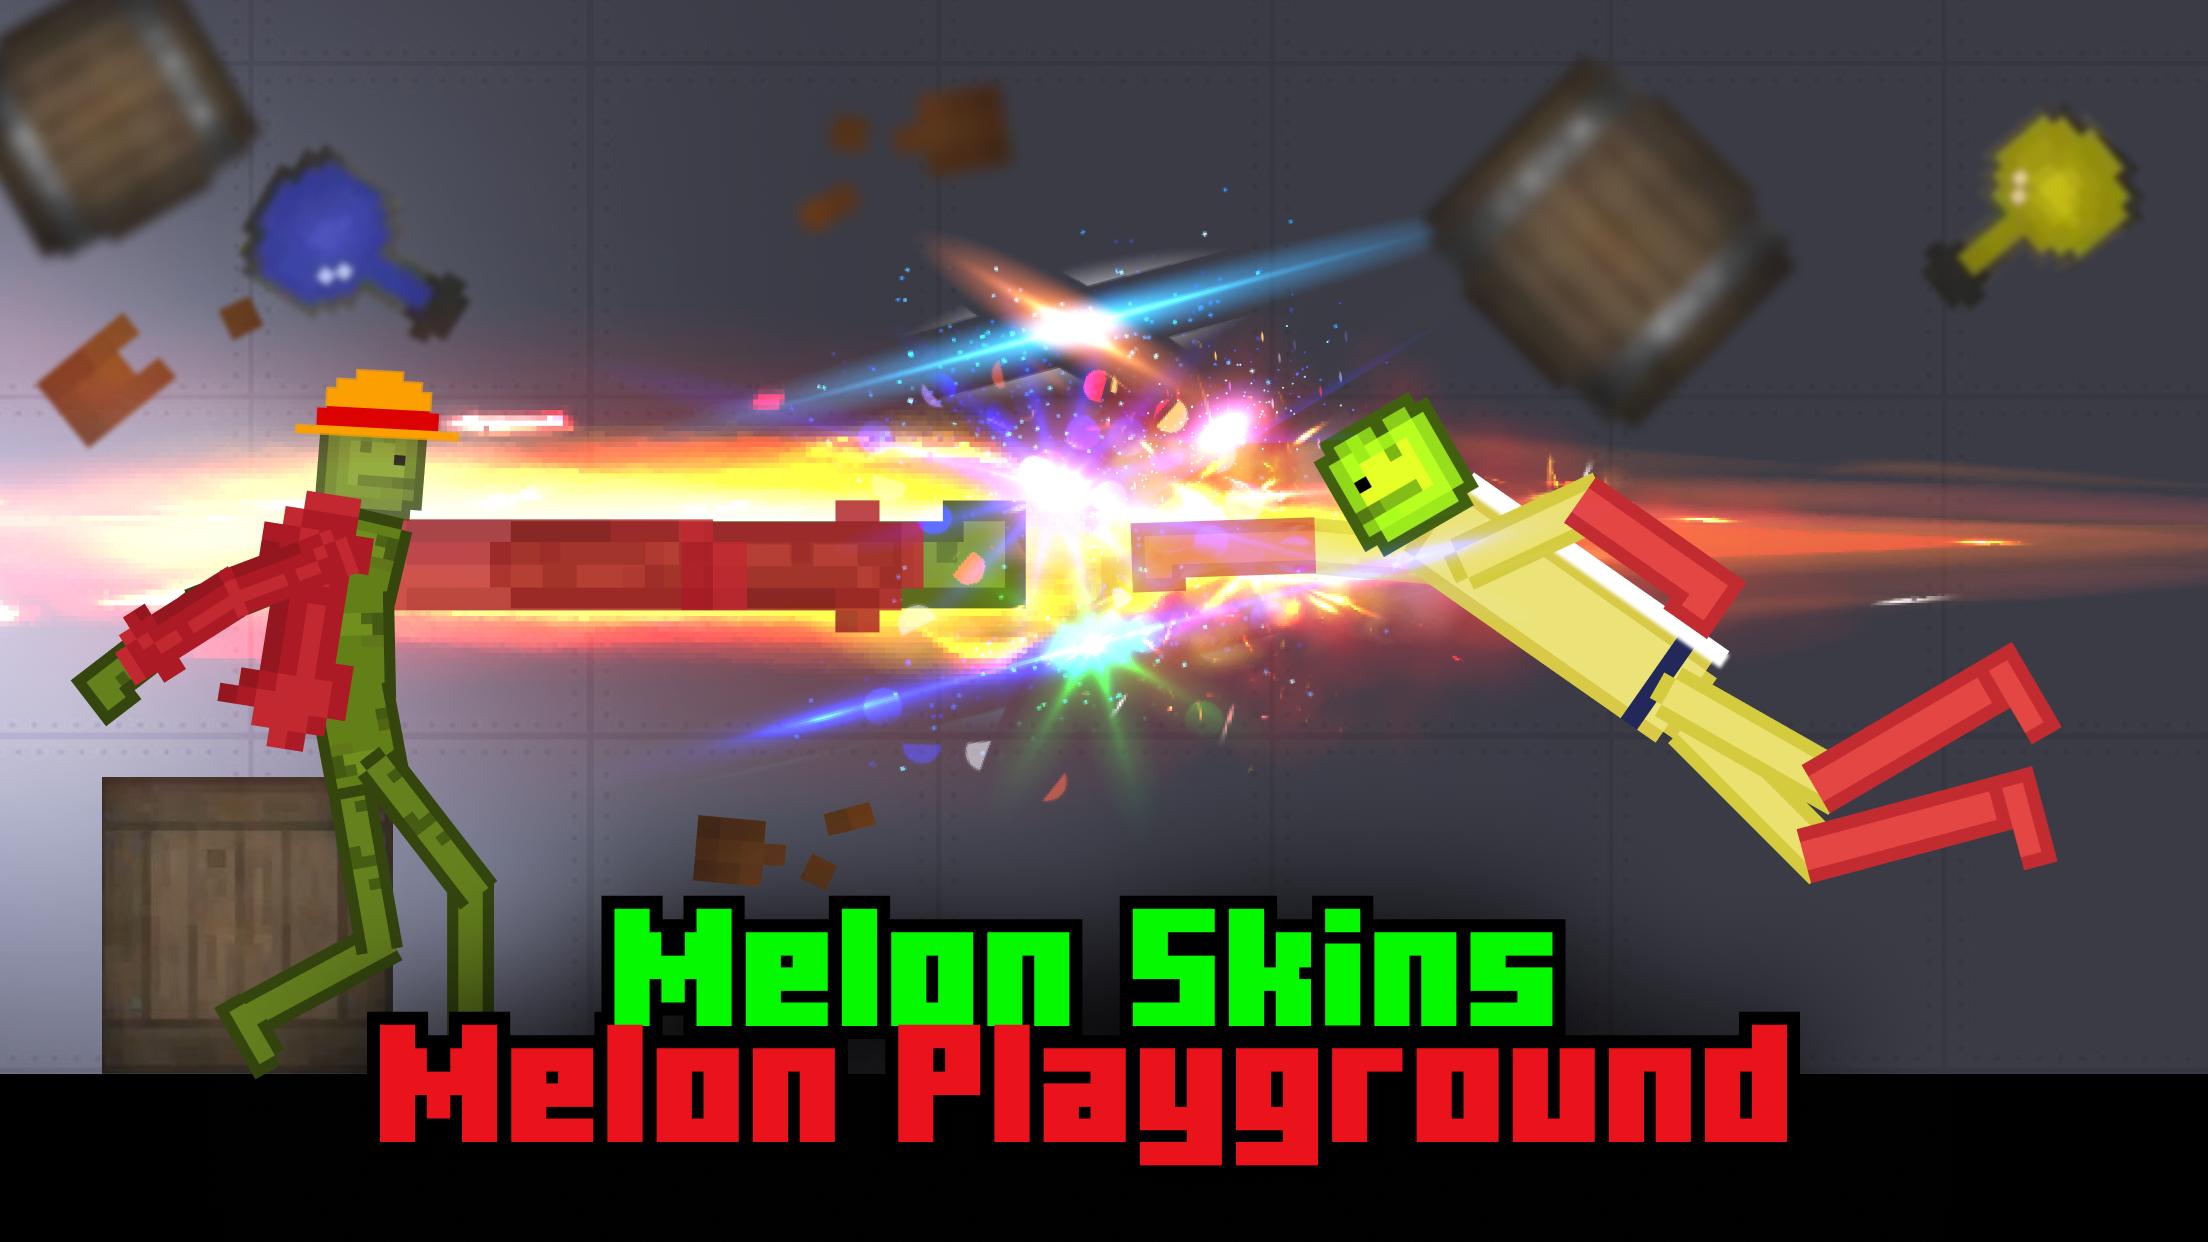 Download Melon Playground Games (MOD) APK for Android